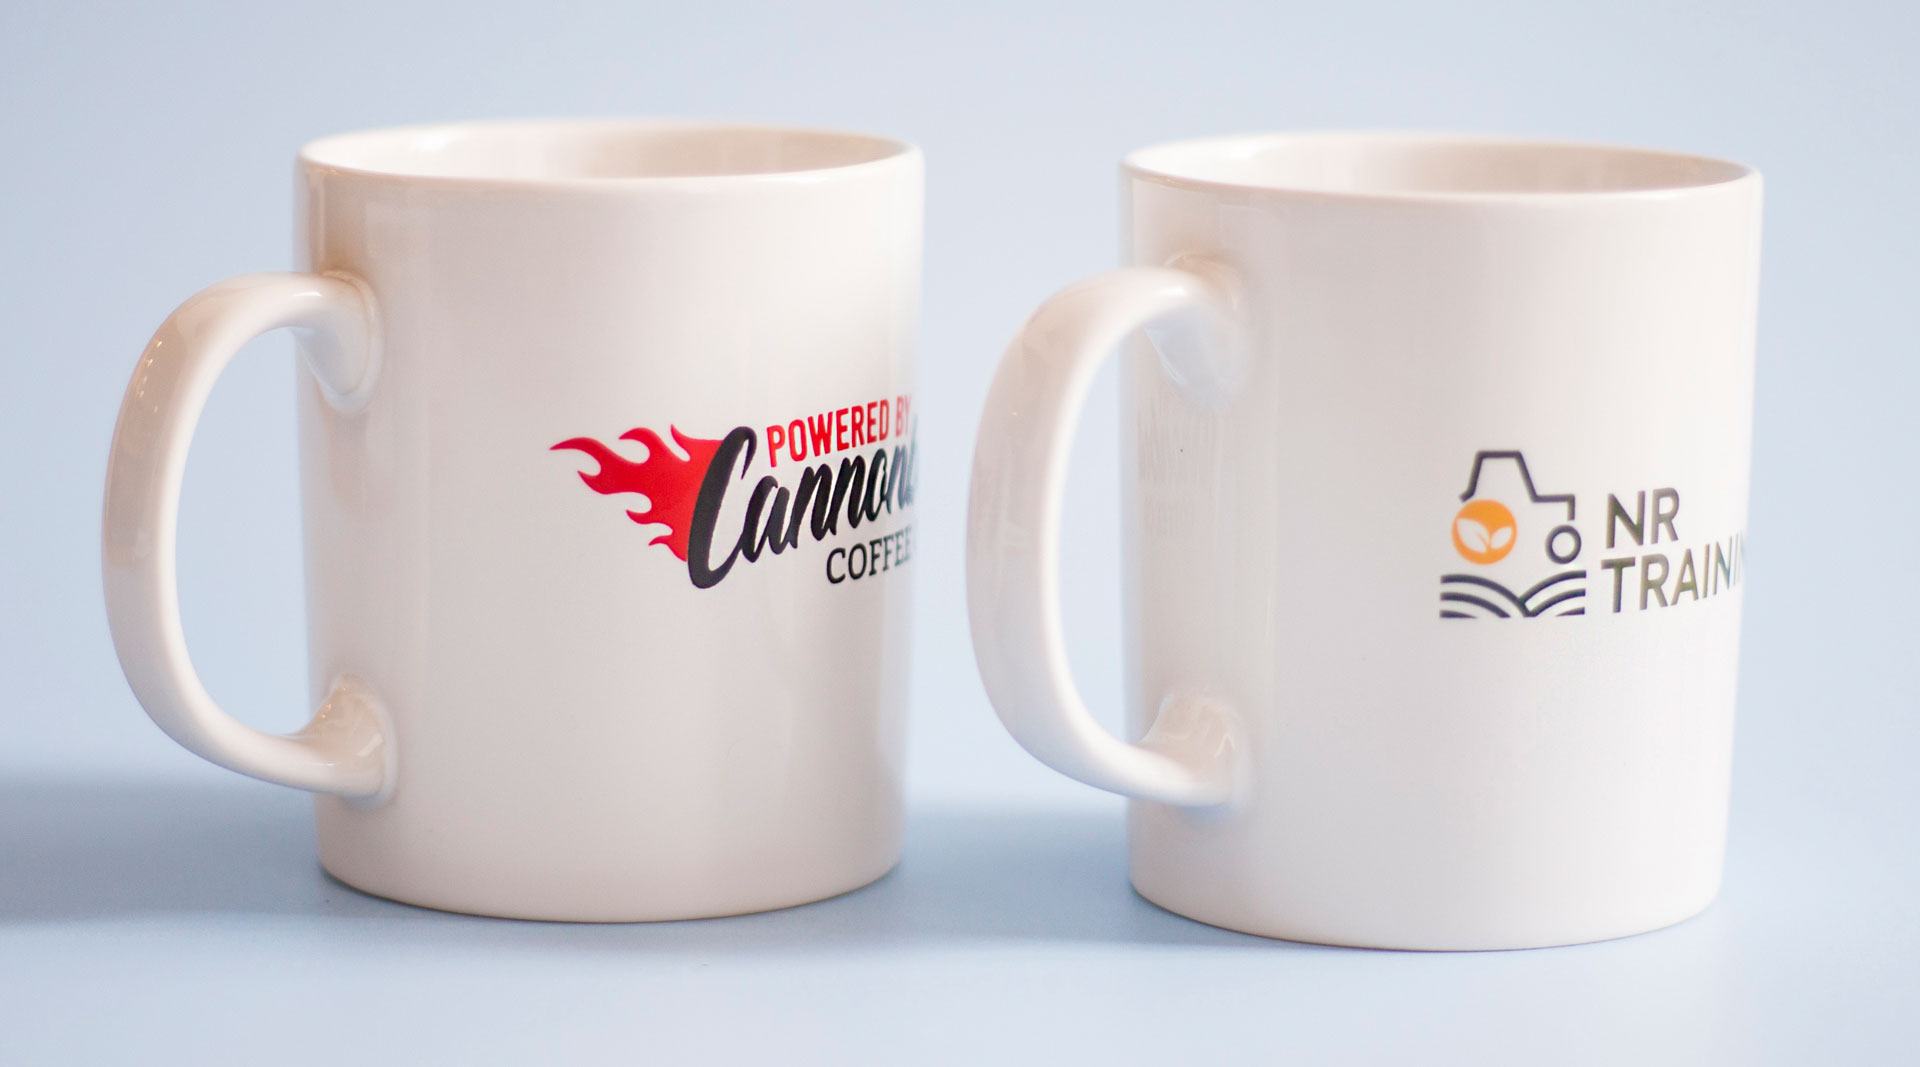 Cambridge printed promotional mugs from Prince William Pottery